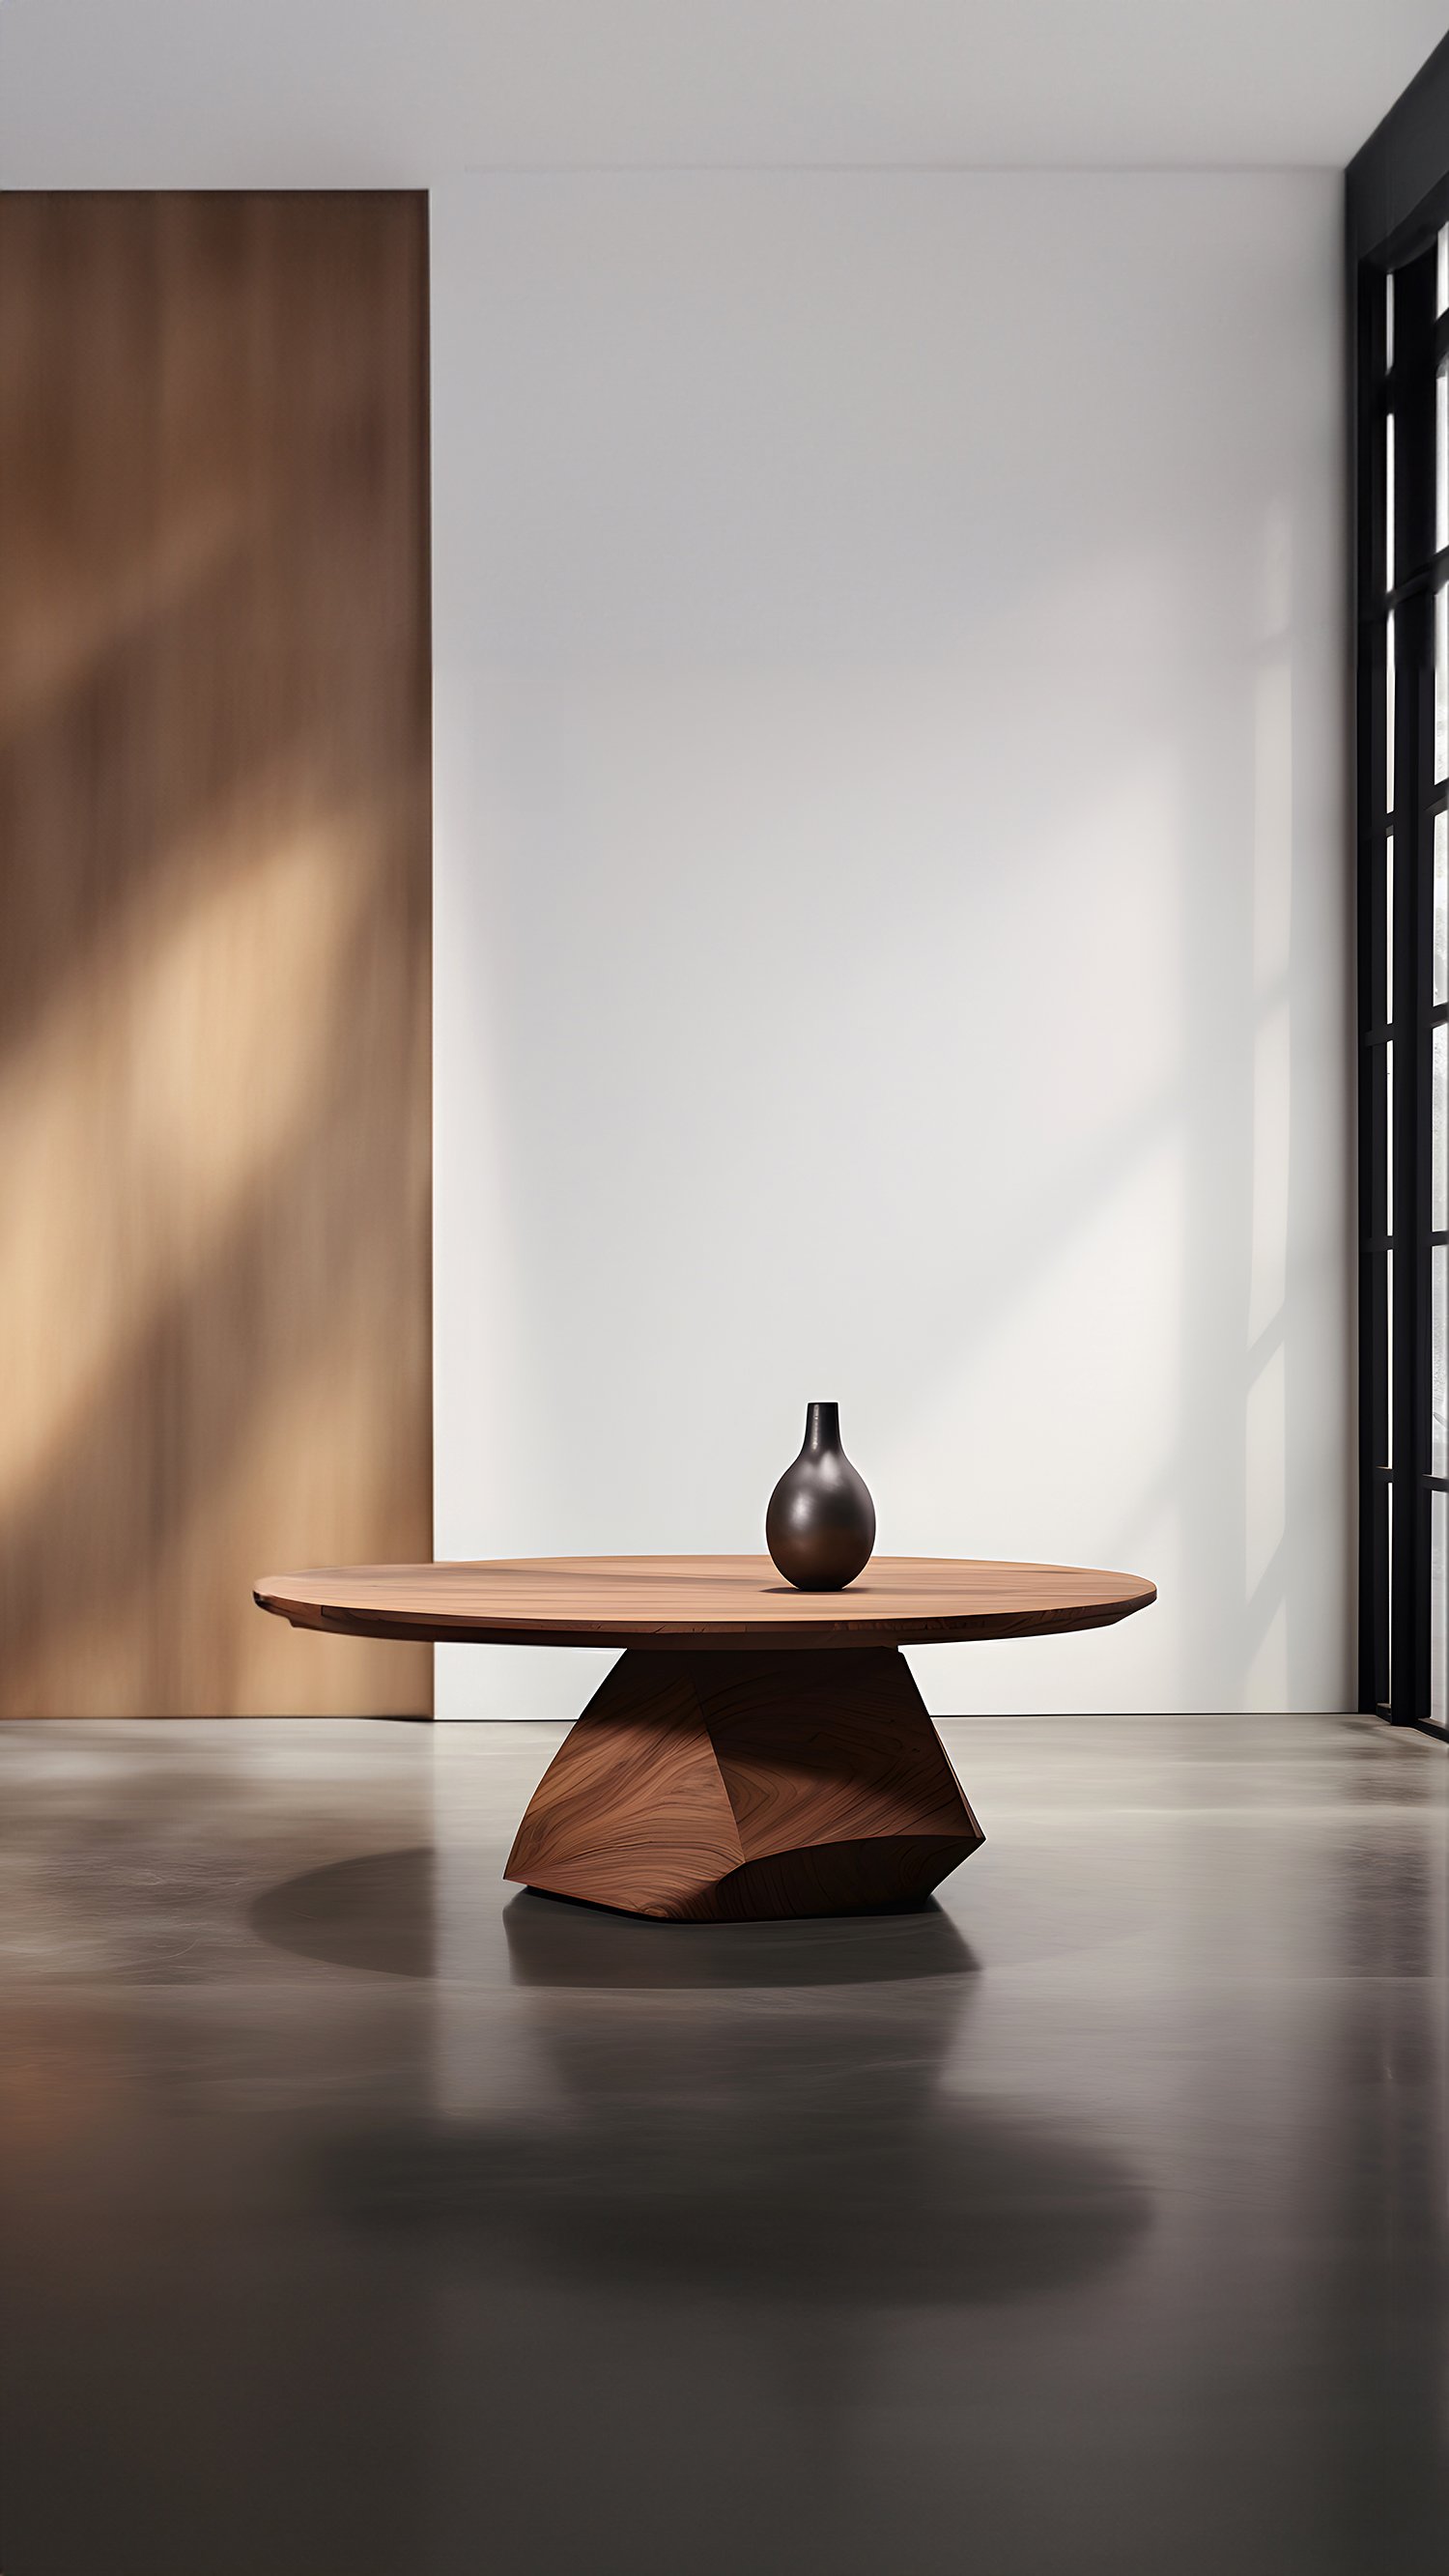 Sculptural Coffee Table Made of Solid Wood, Center Table Solace S29 by Joel Escalona — 7.jpg